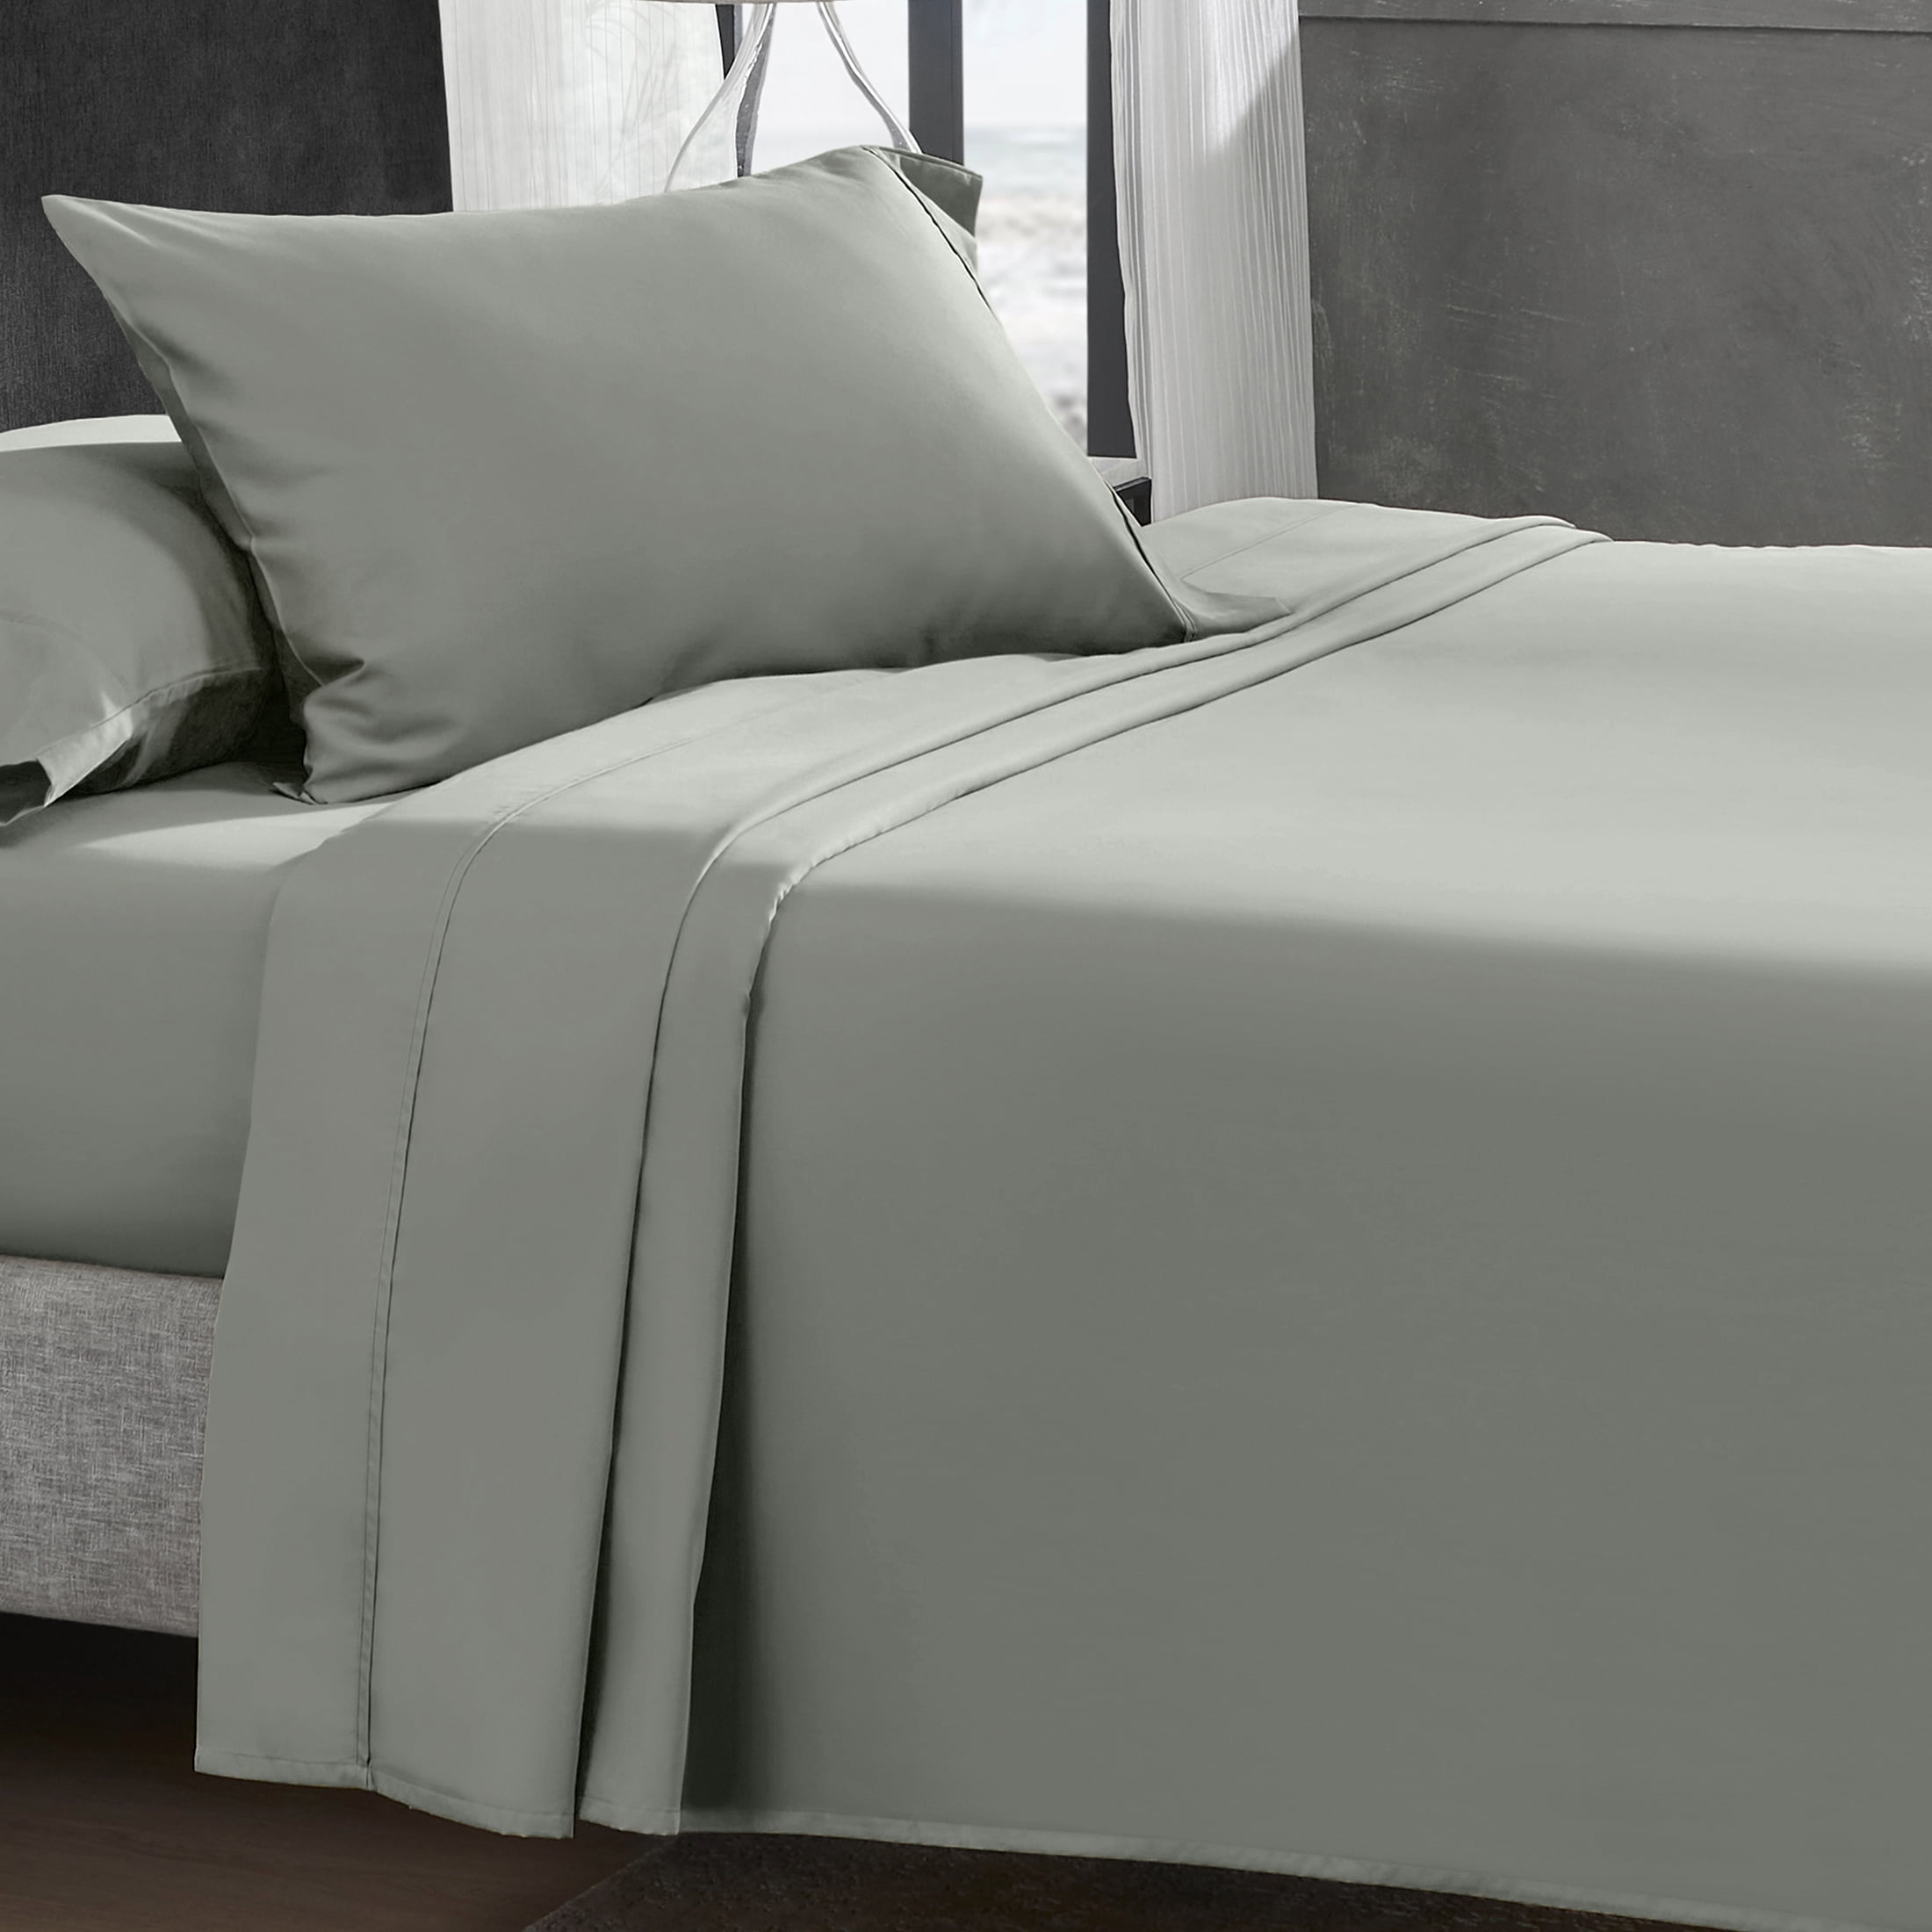 Details about   100% Cotton Luxury Bedding Sheet Set 800 TC In Navy blue,All Size & Pocket 